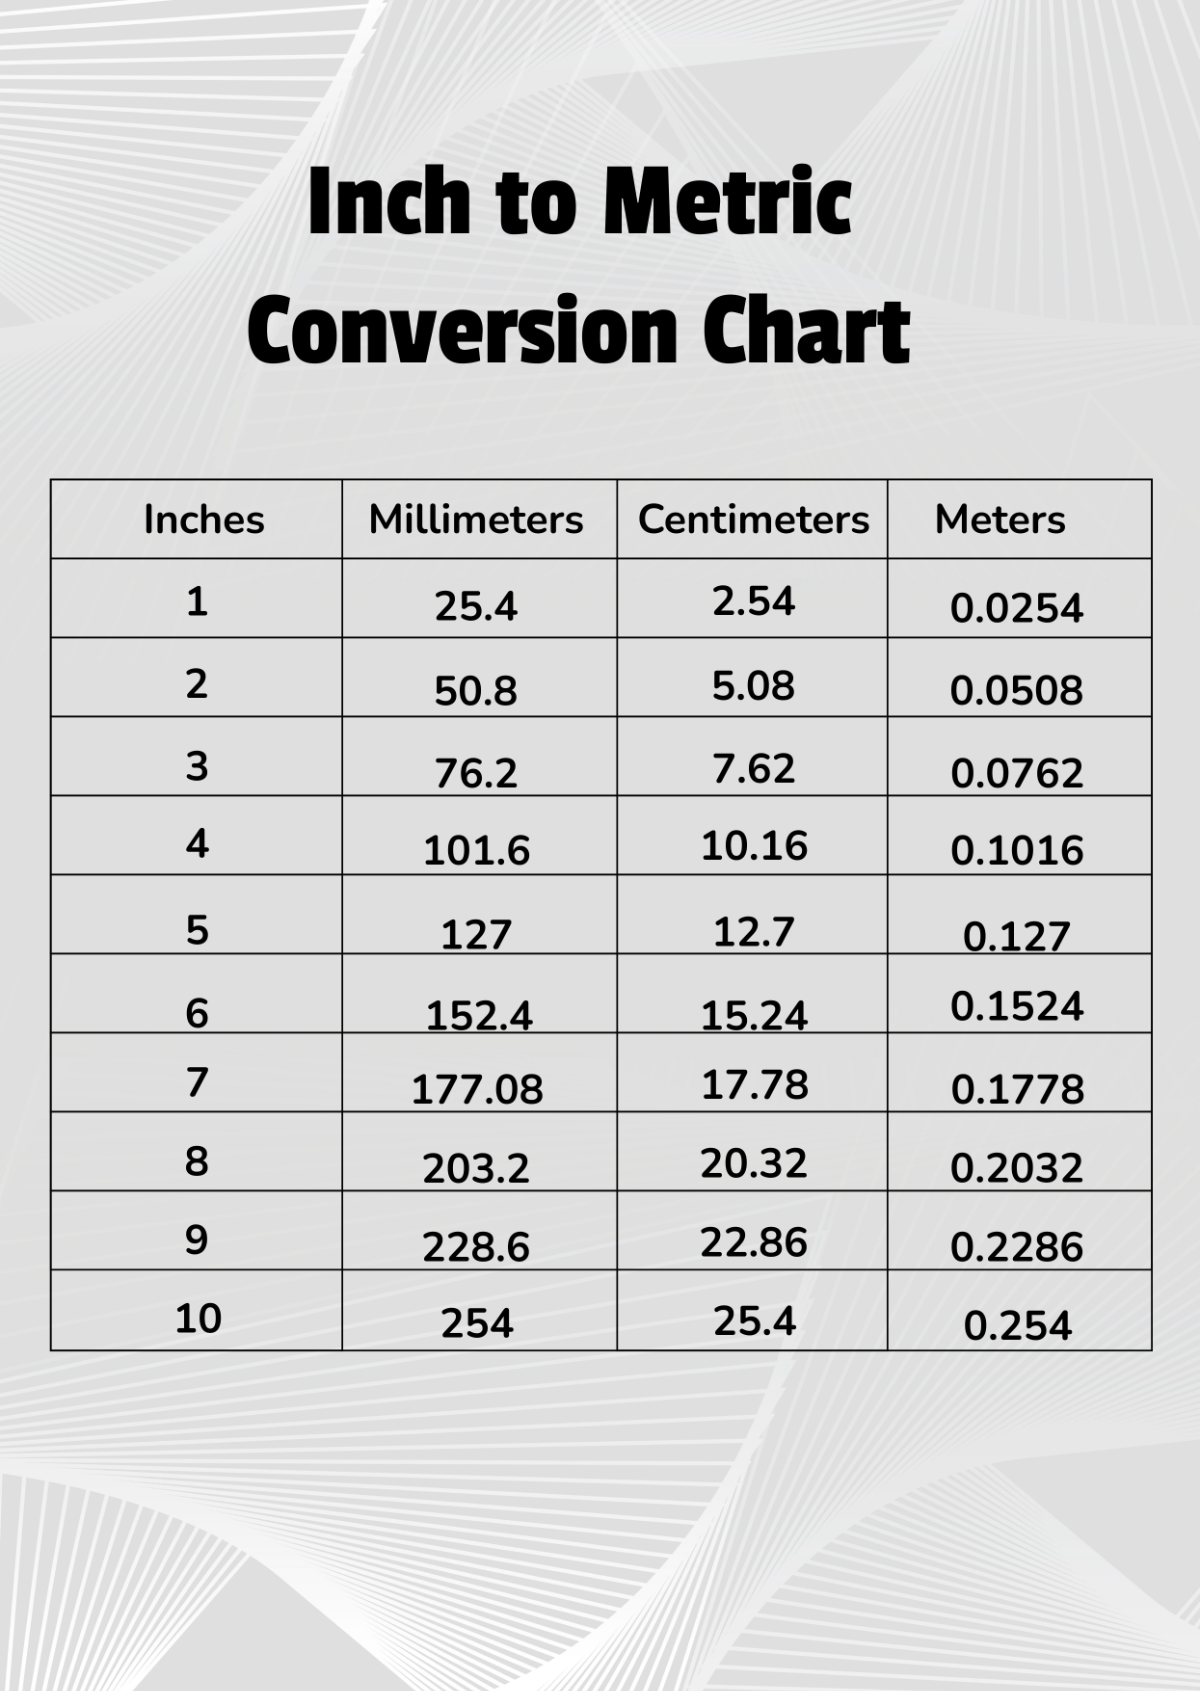 Inch to Metric Conversion Chart